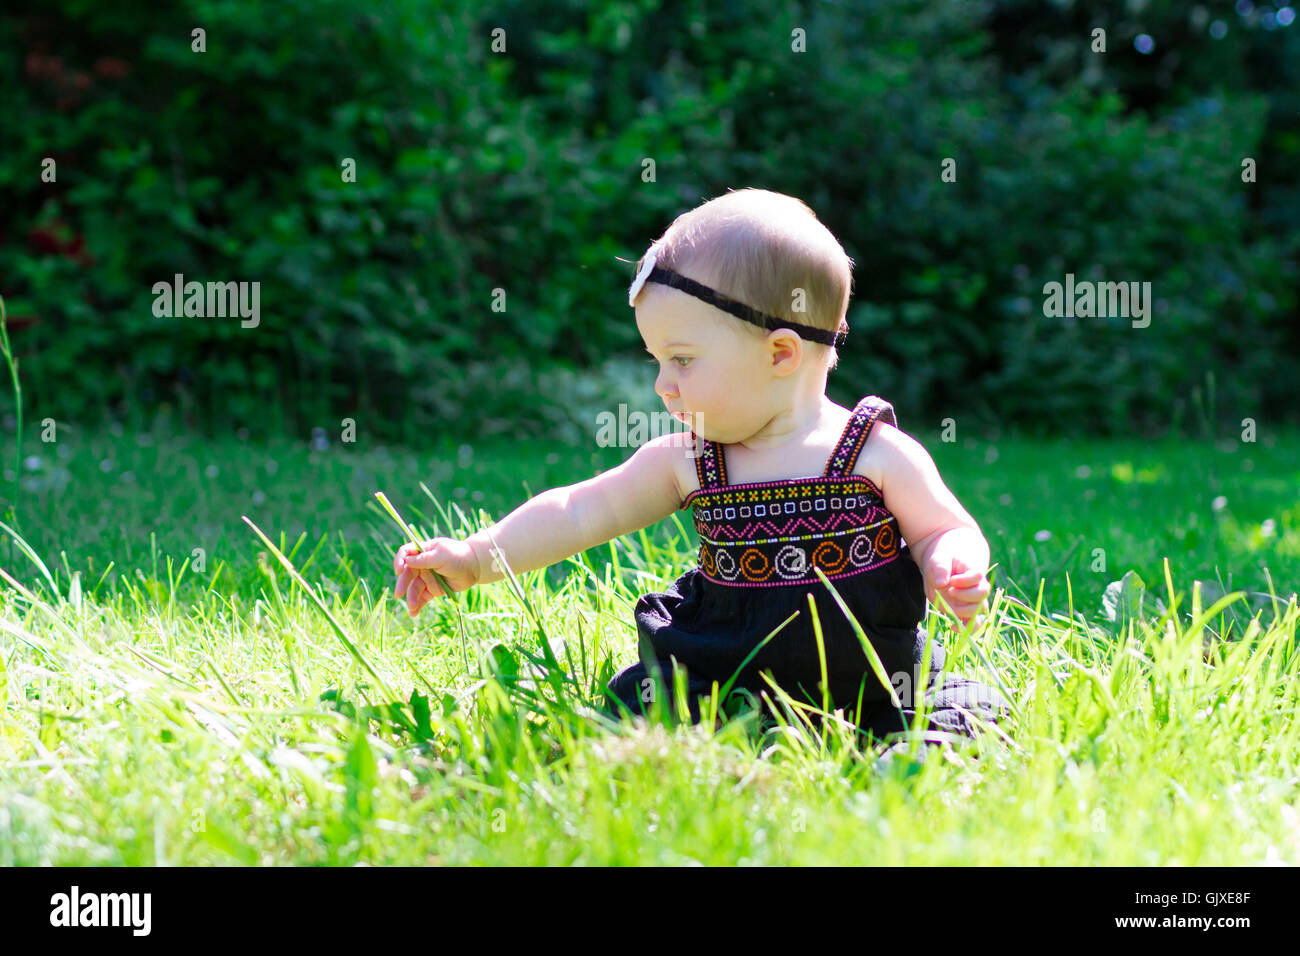 Baby girl at roughly 6 months old outdoors in a natural setting with available light for a lifestyle portrait. Stock Photo